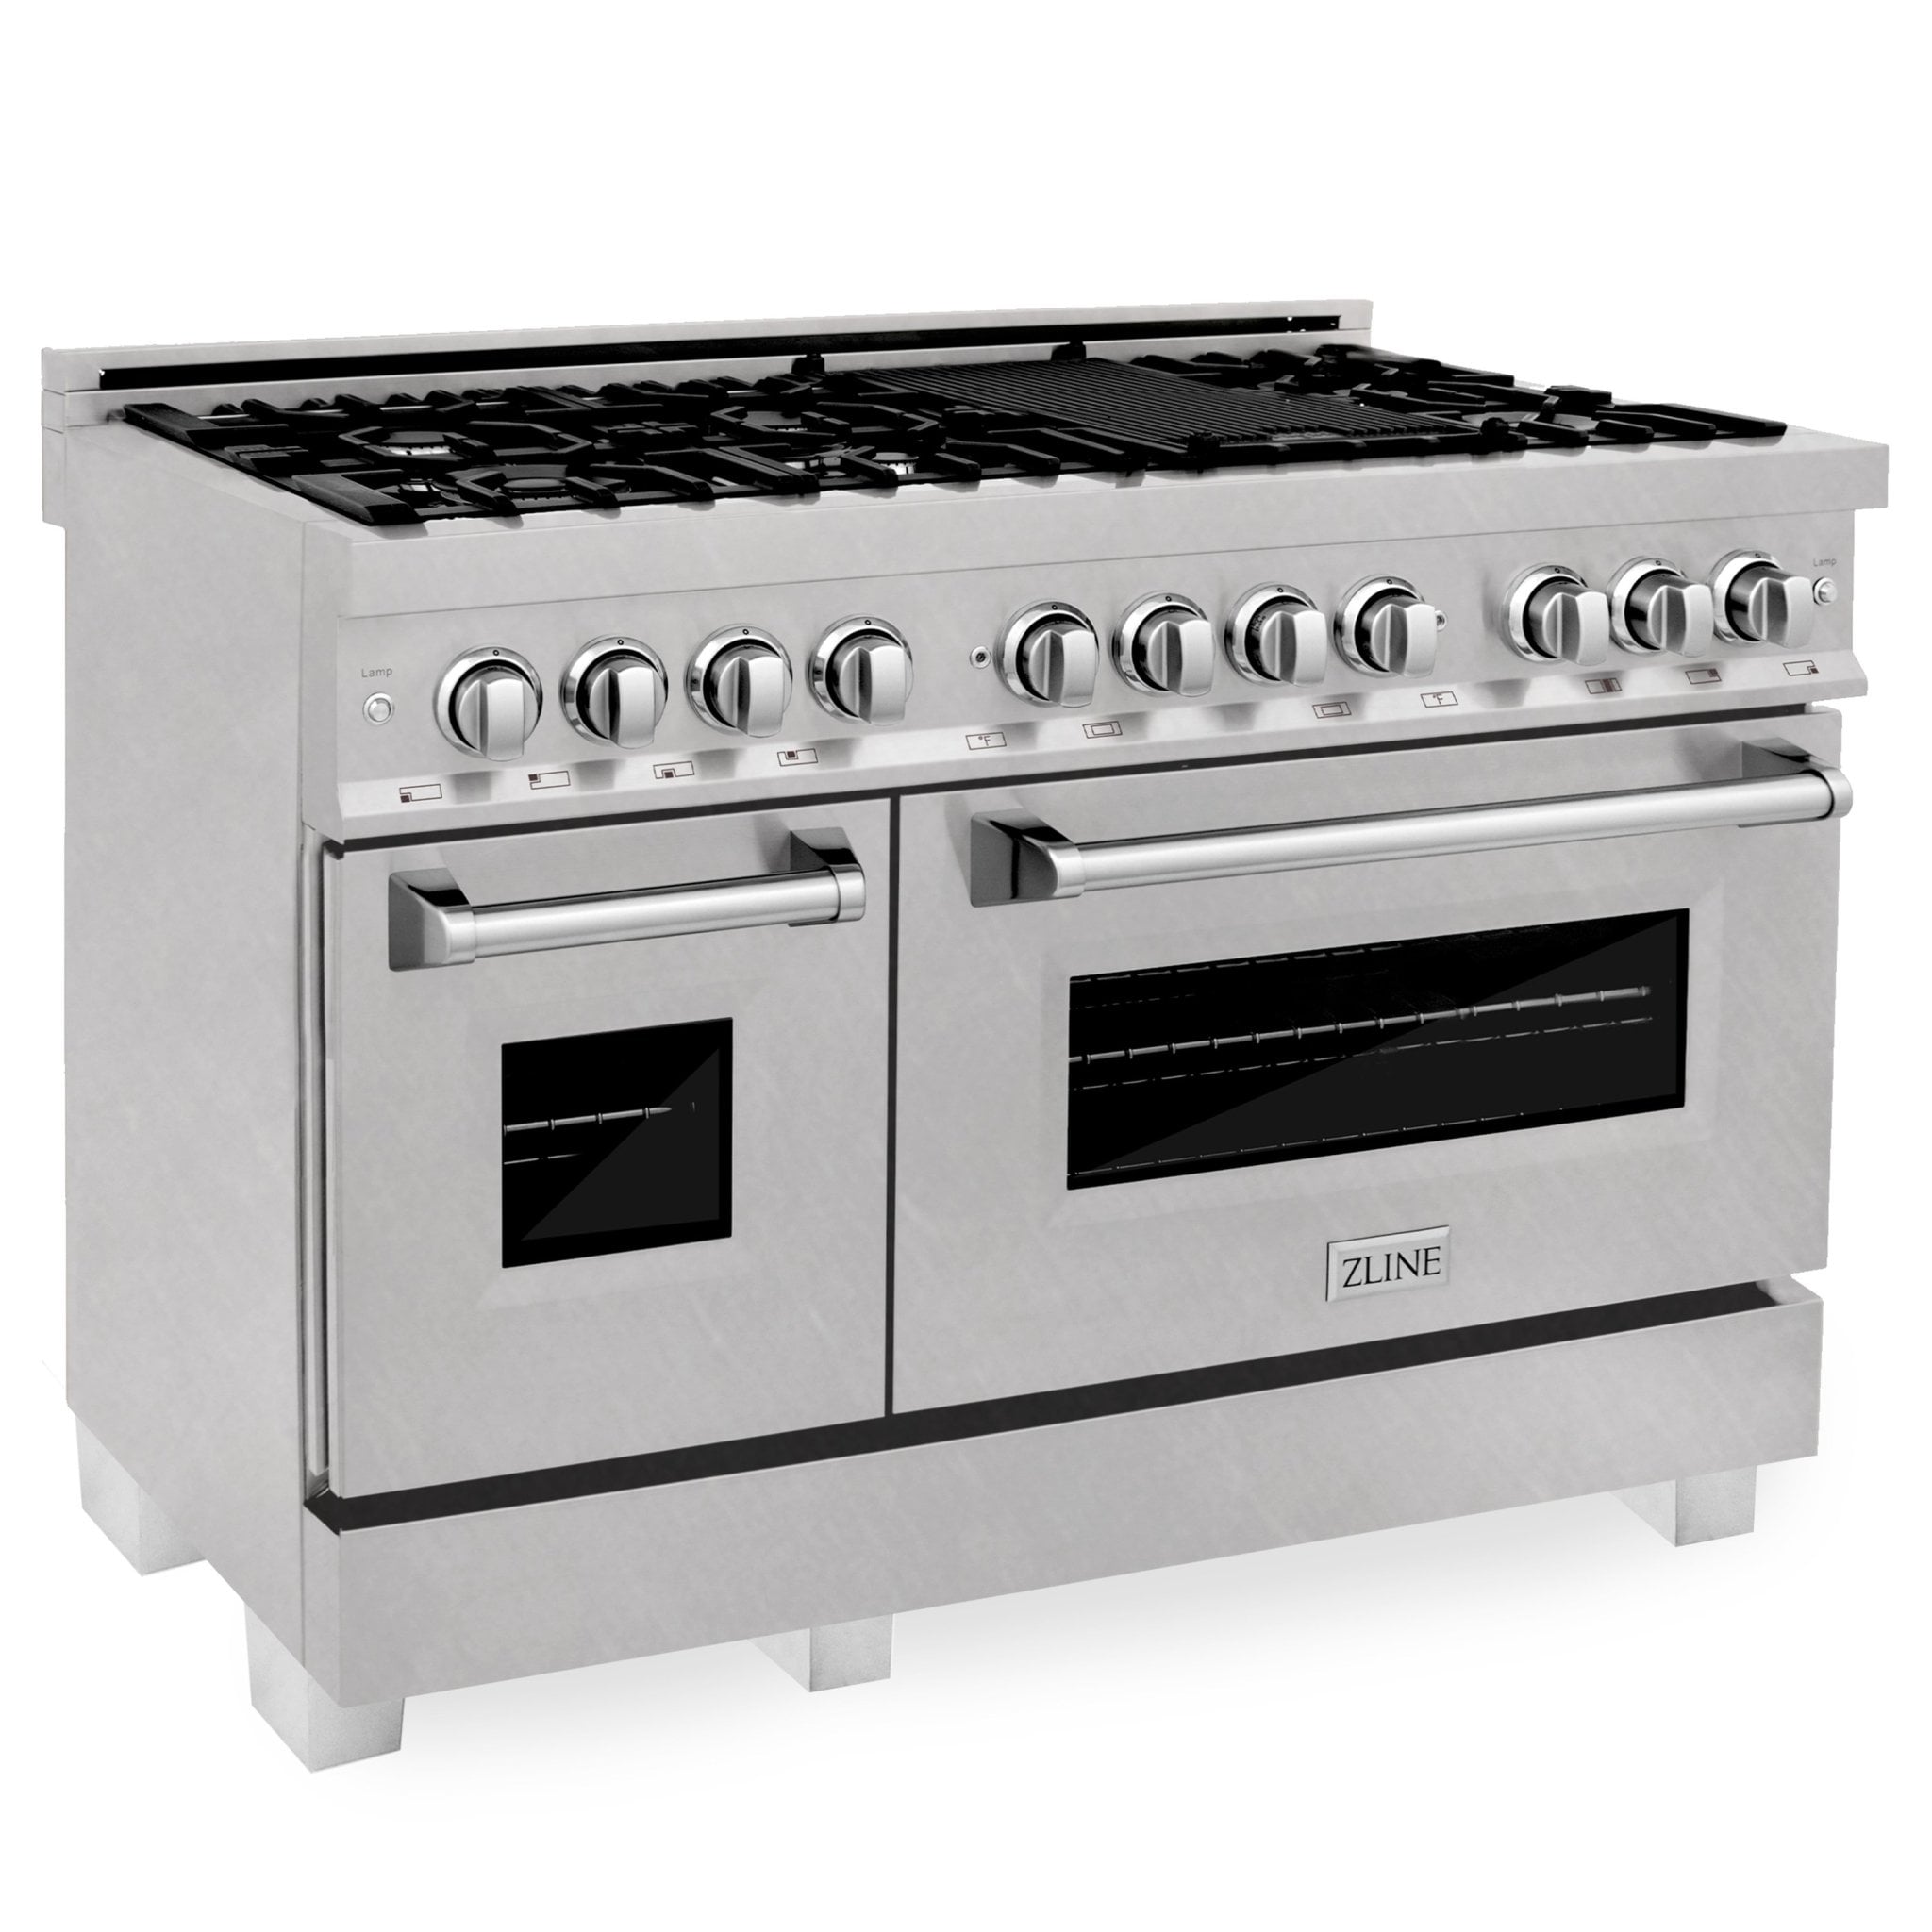 Zline Kitchen and Bath ZLINE 48" 6.0 cu. ft. Dual Fuel Range with Gas Stove and Electric Oven in Fingerprint Resistant Stainless Steel